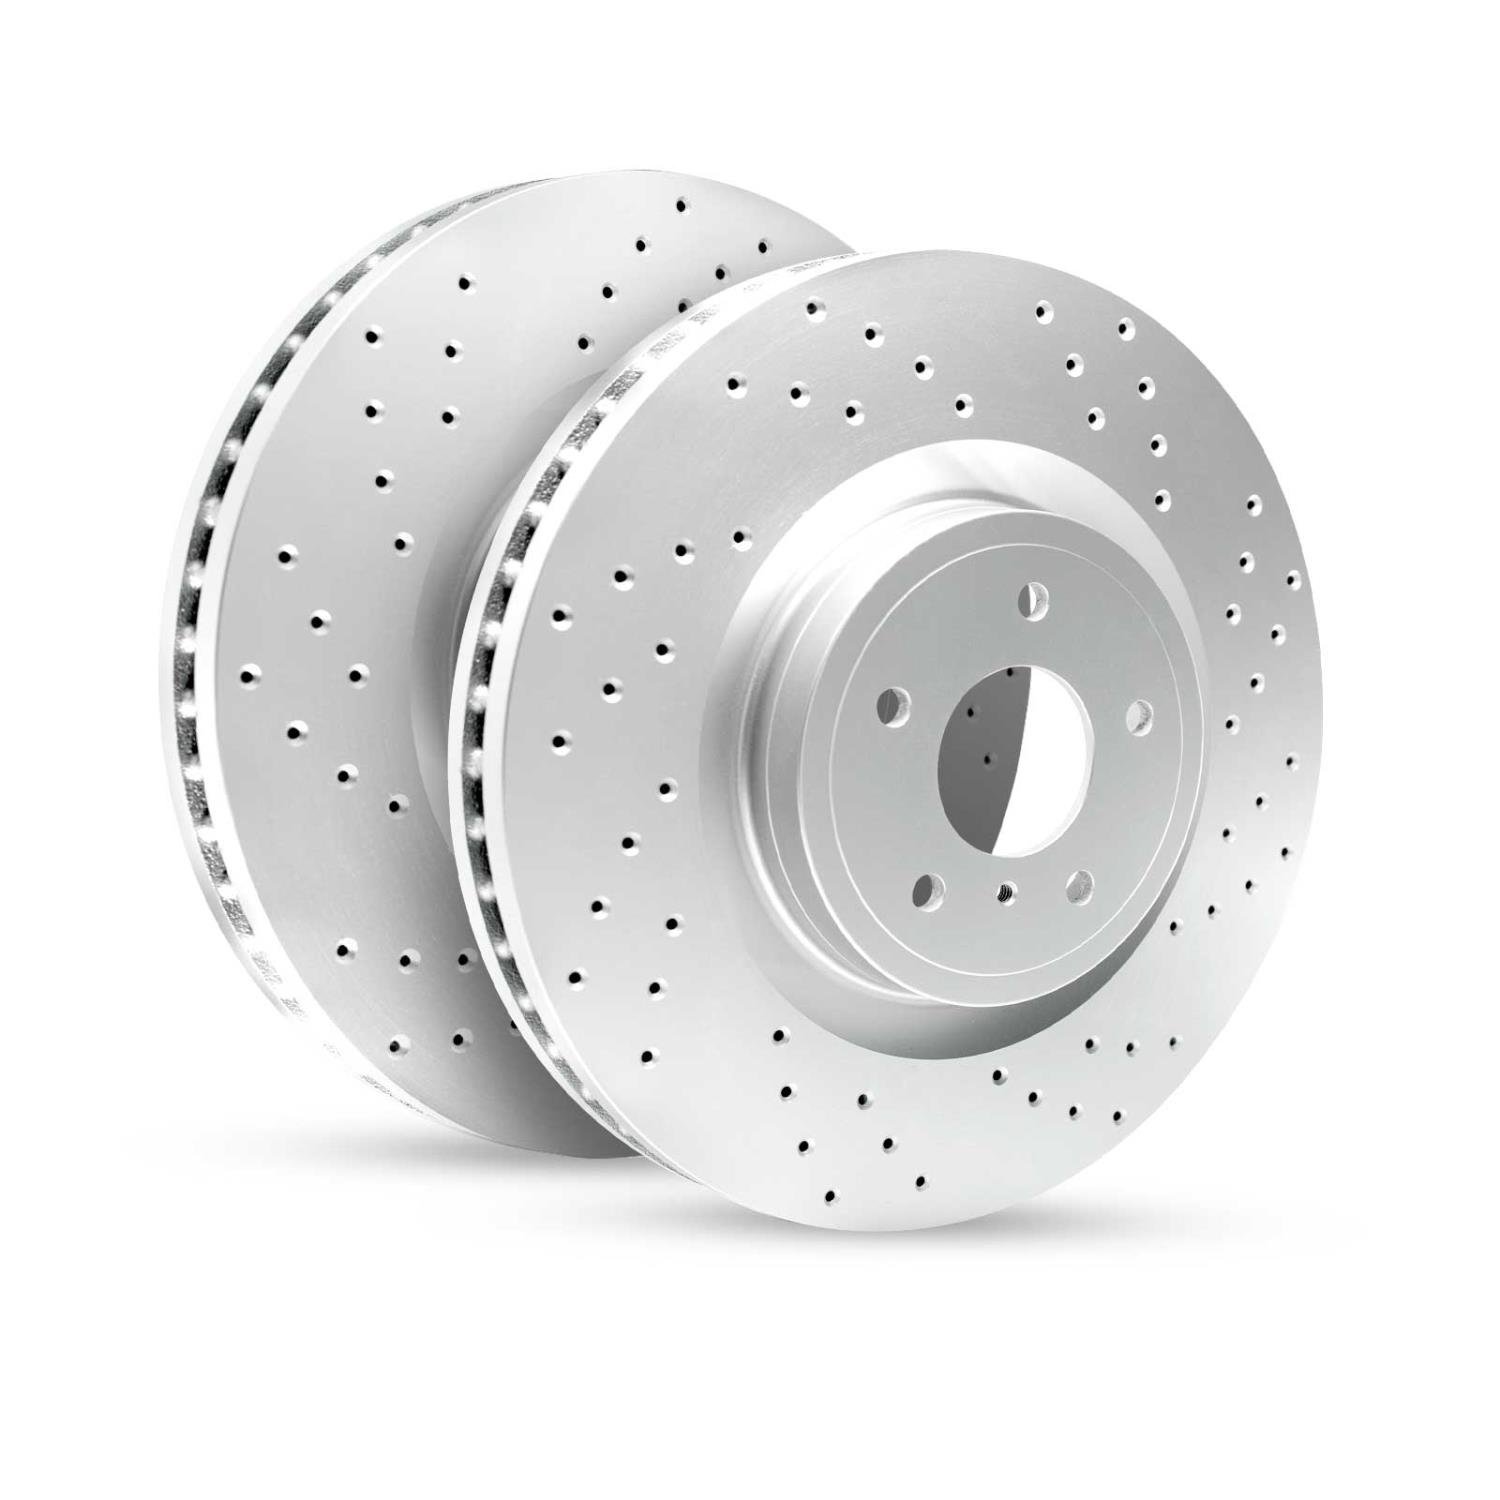 GEO-Carbon Drilled/Slotted Rotors, 1994-2004 Infiniti/Nissan,